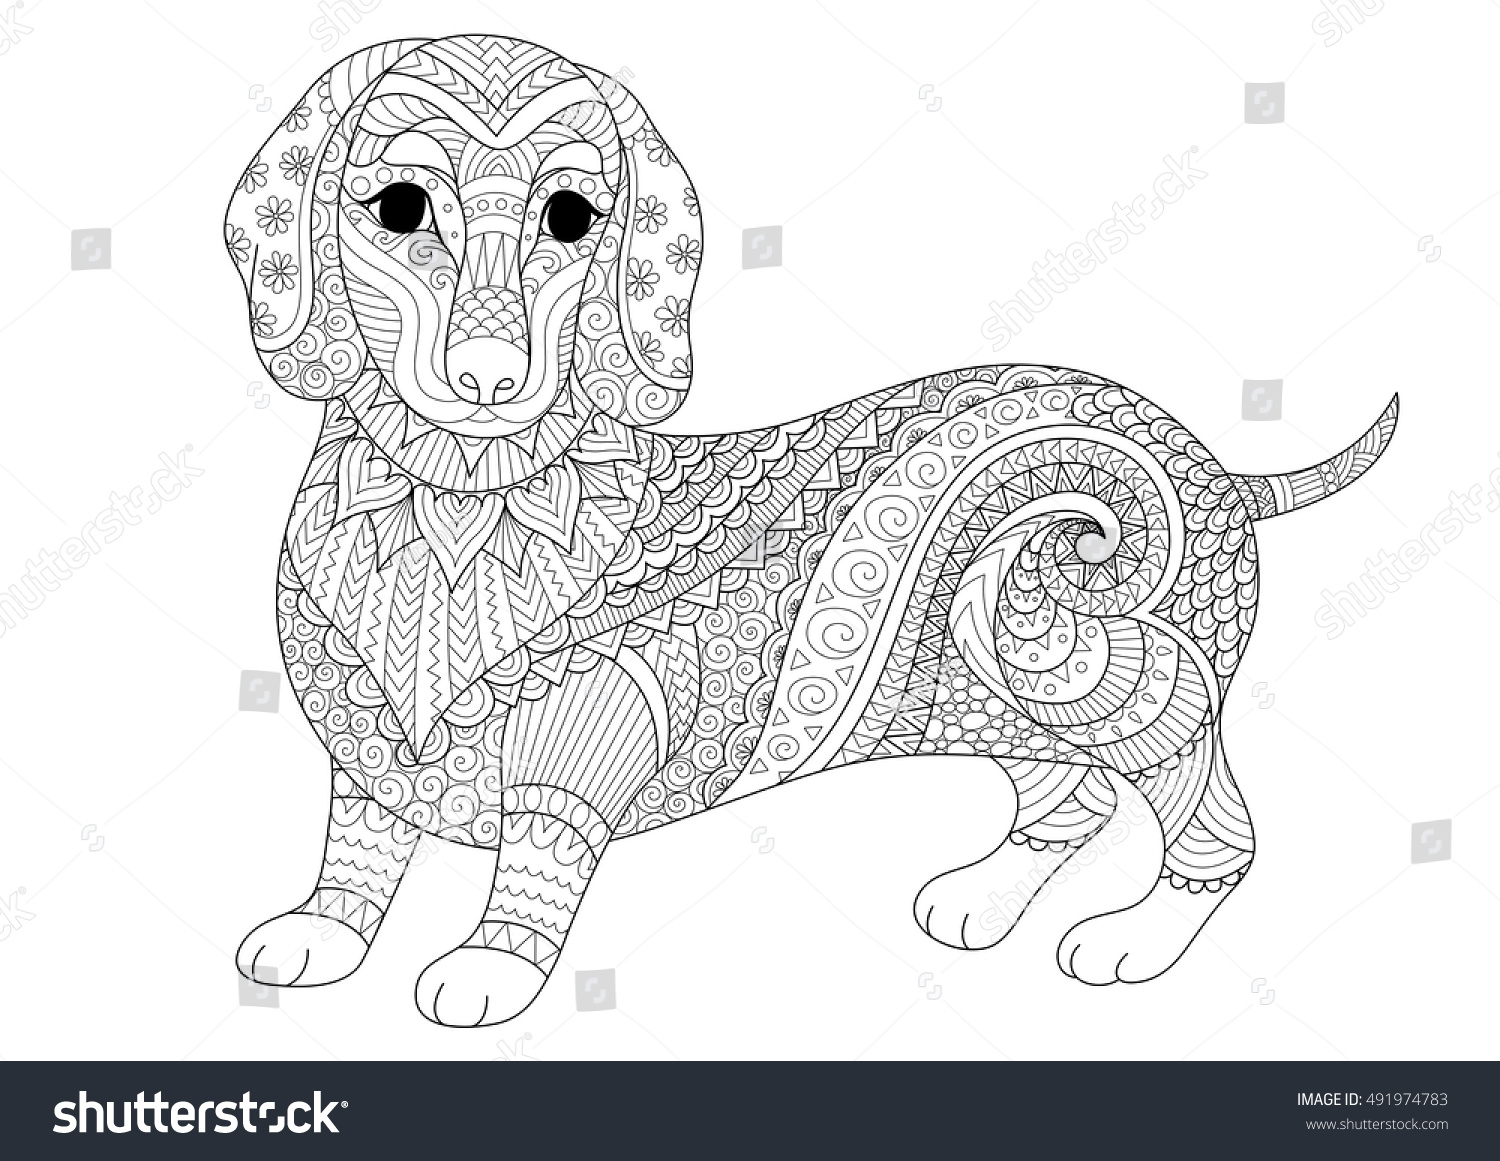 Zendoodle design dachshund puppy adult coloring stock vector royalty free